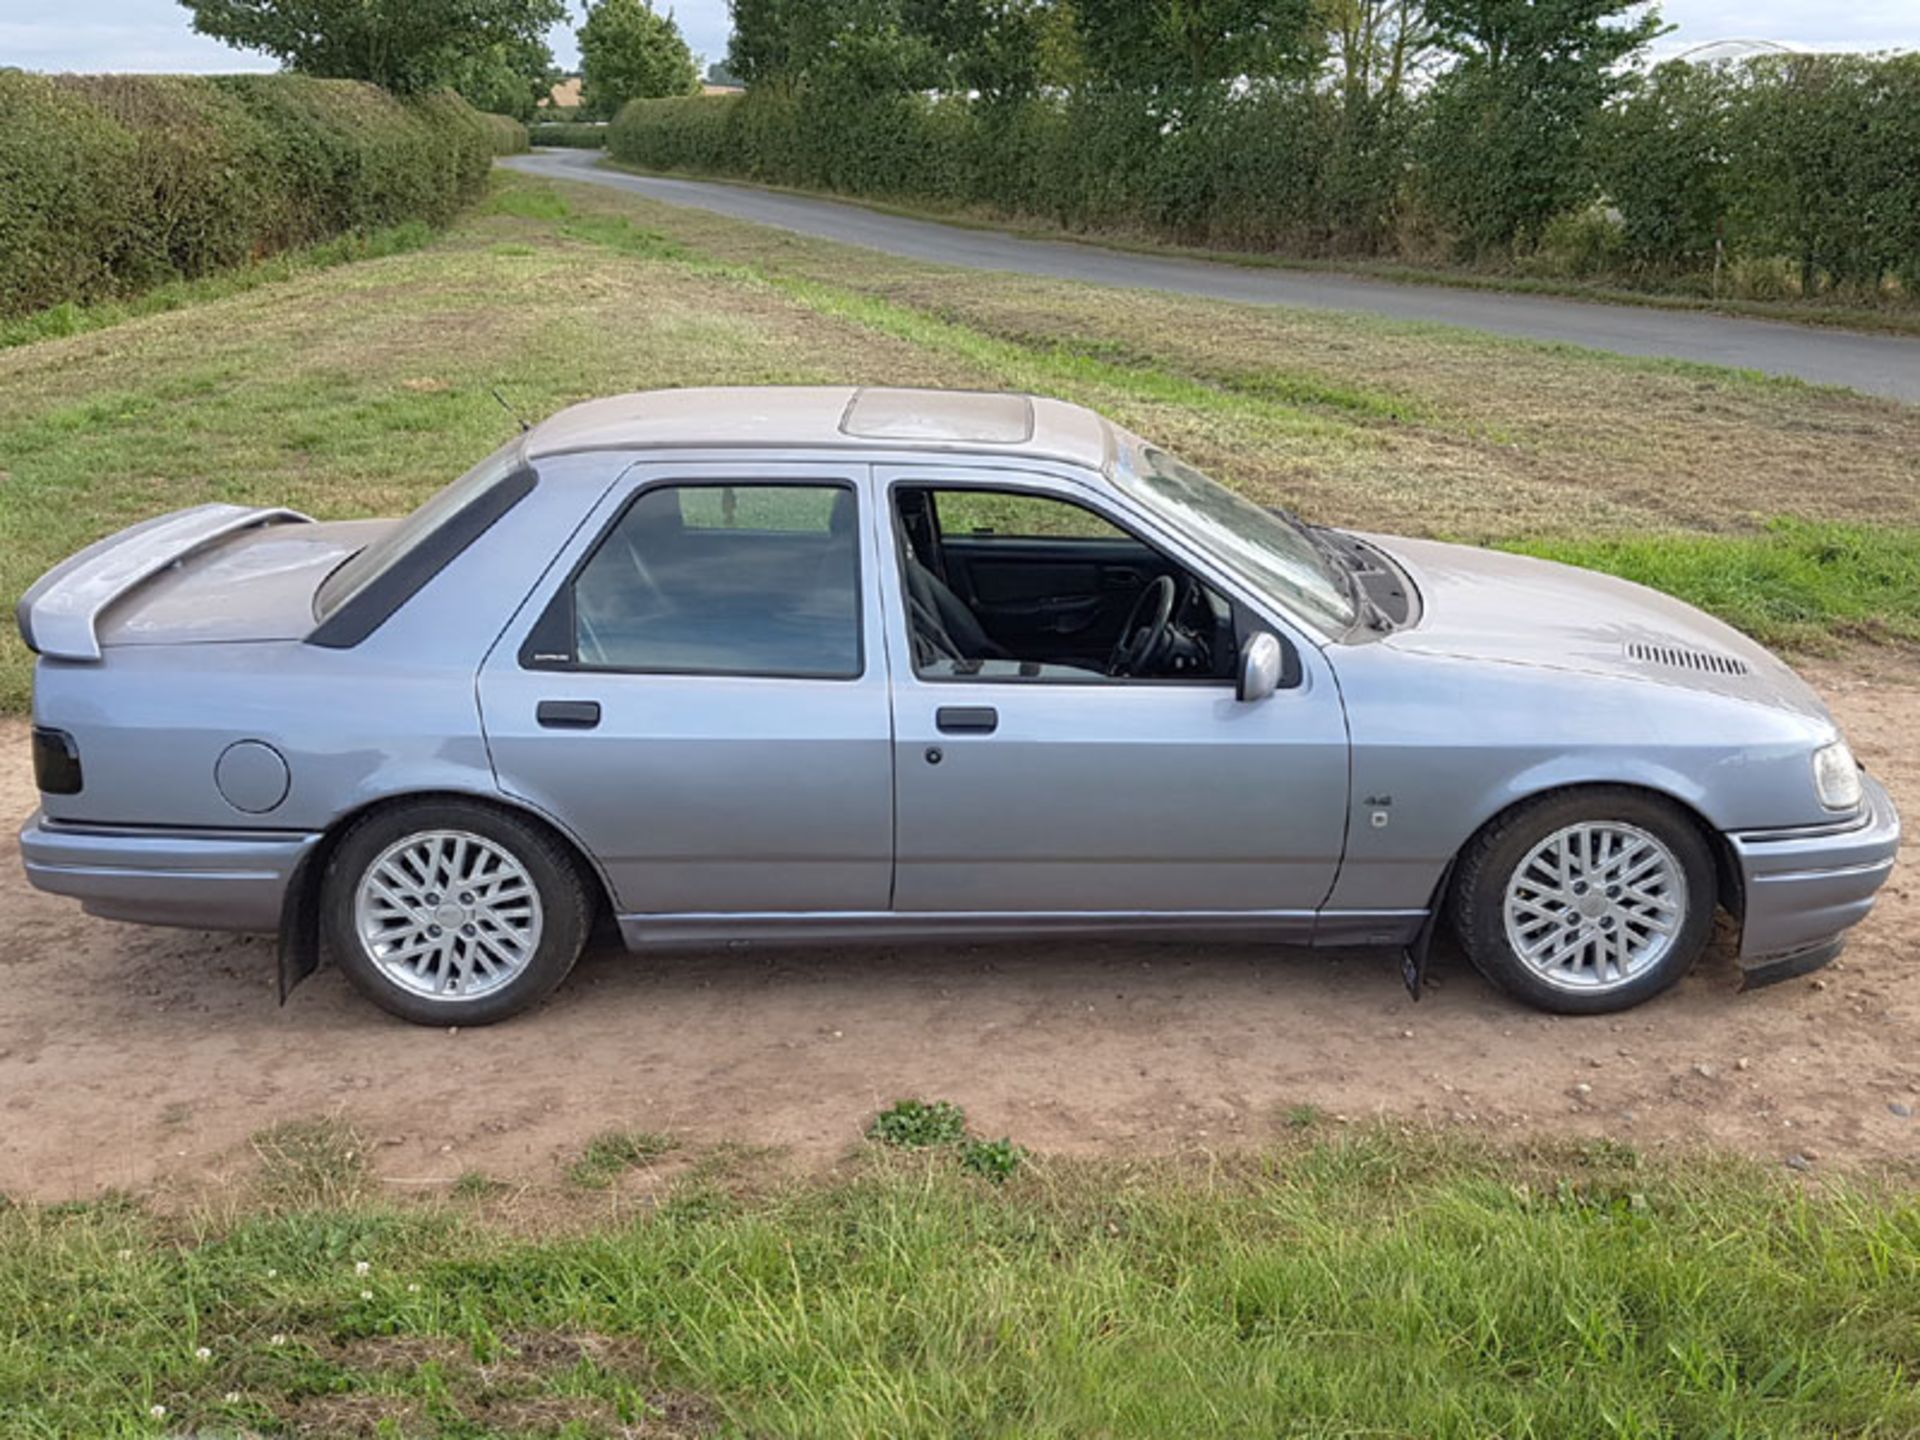 1991 Ford Sierra Sapphire RS Cosworth - Image 3 of 4